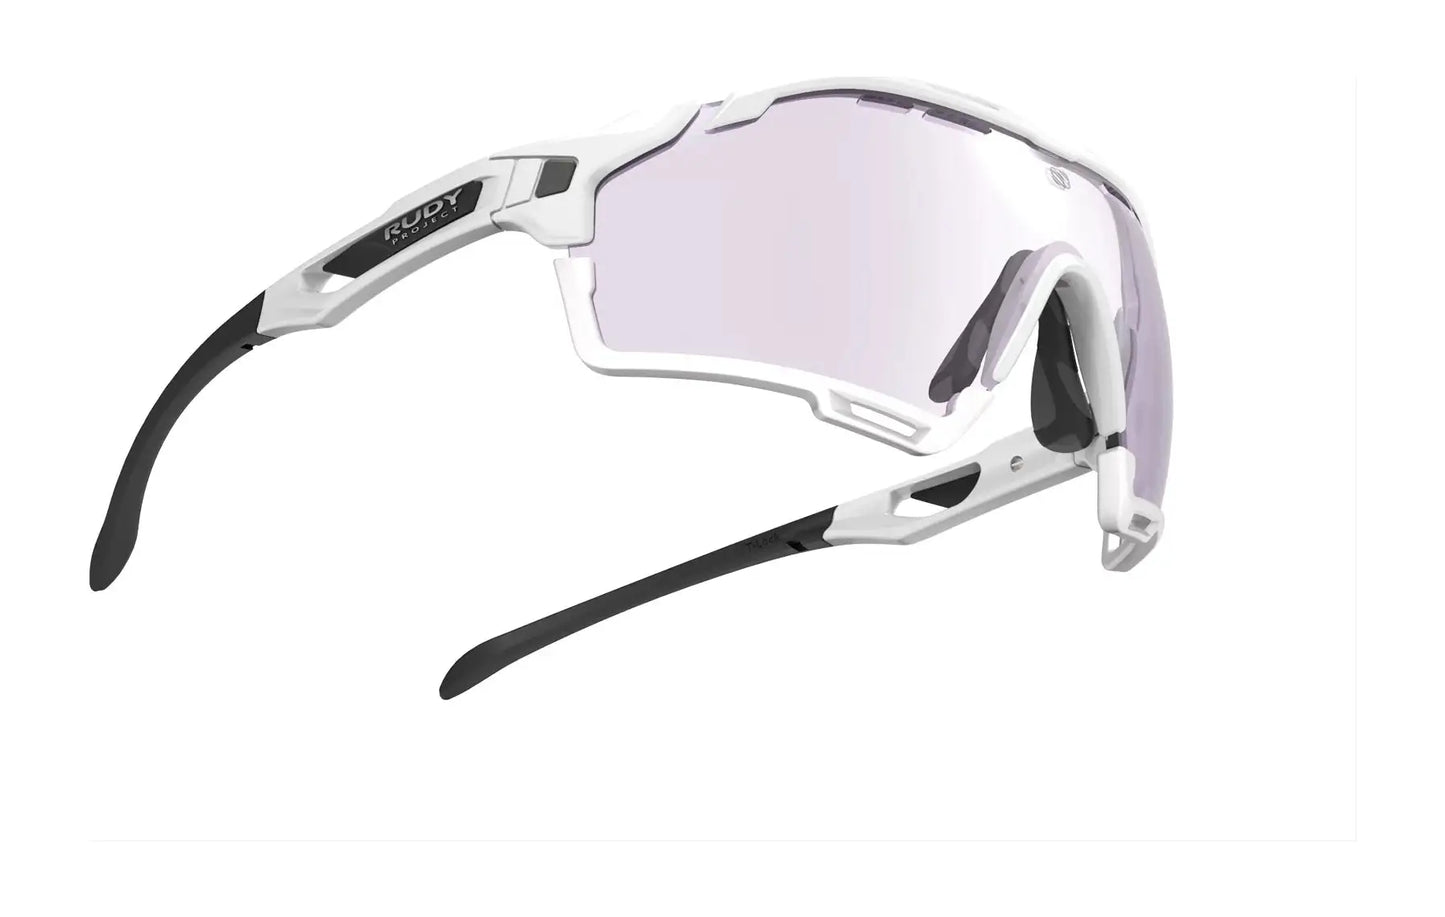 Rudy Project Cutline Sunglasses | Size 141